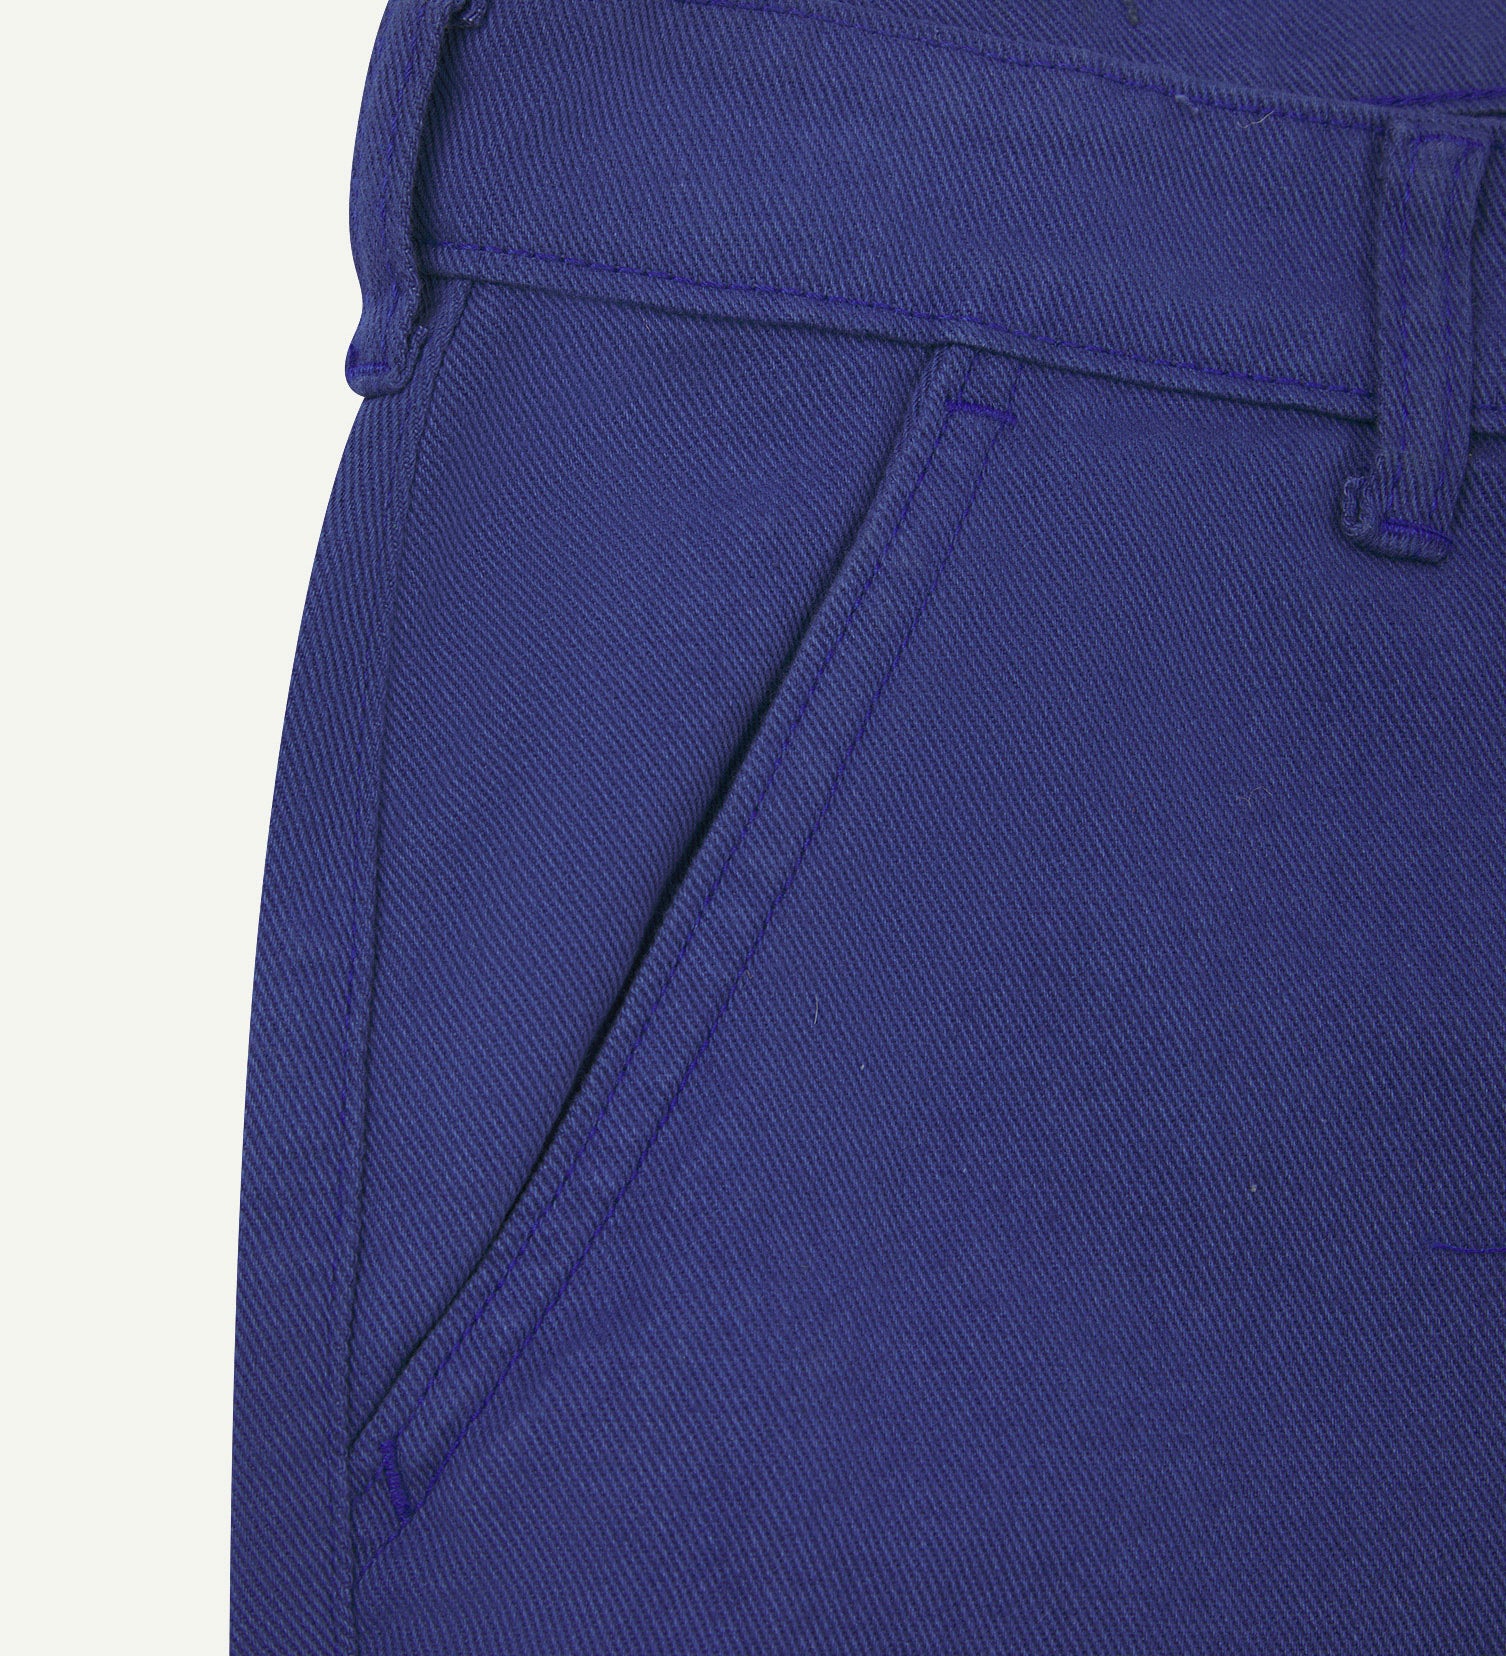 Close-up front view of the left-front pocket, belt loops and Corozo button of ultra-blue heavyweight drill pants.